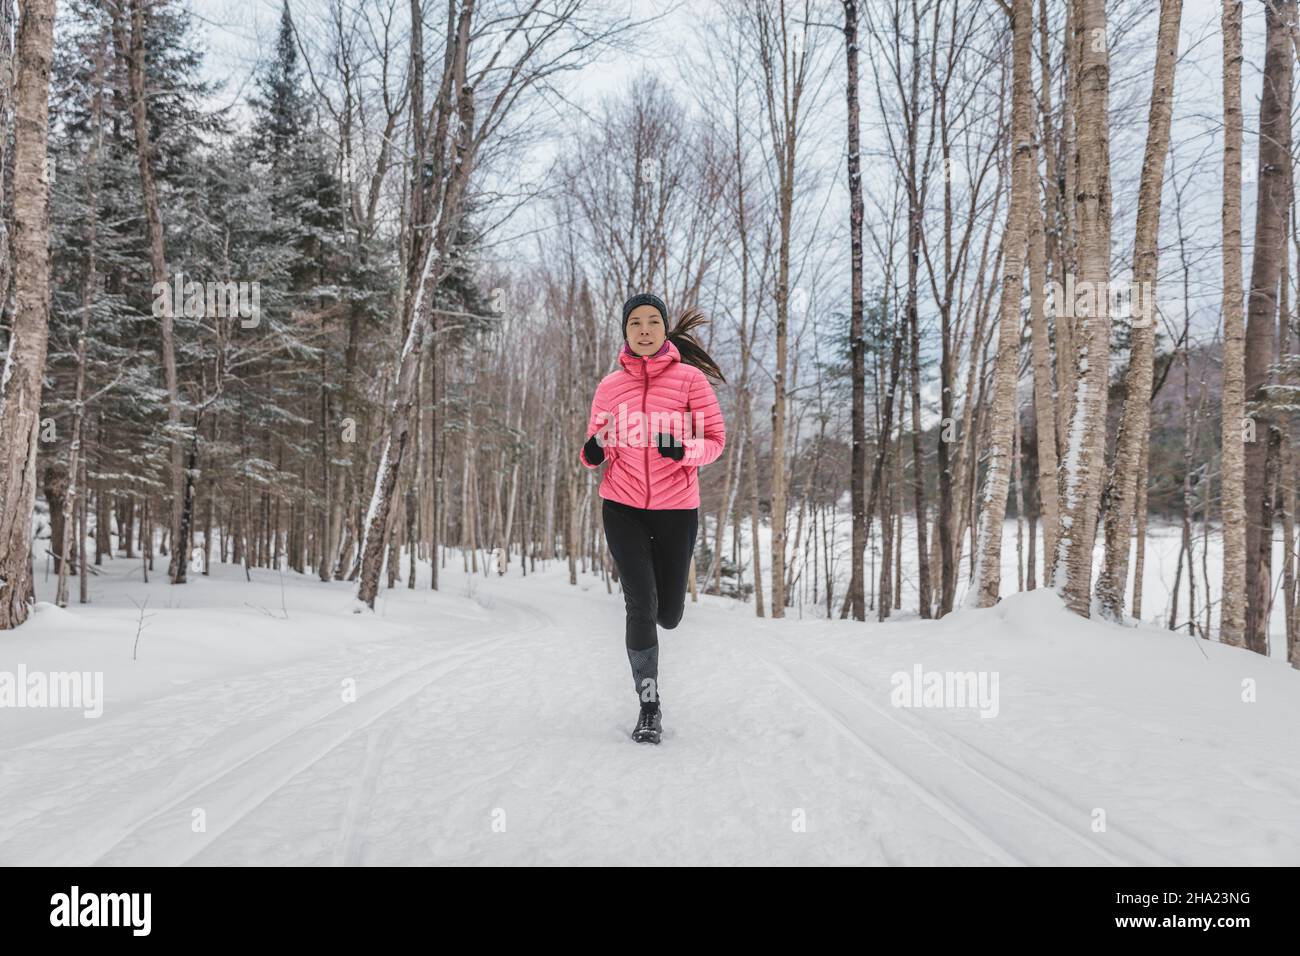 Winter Woman Running in Snow. Runner working out outside on winter day in forest. Fit healthy lifestyle picture of beautiful young sports model Stock Photo